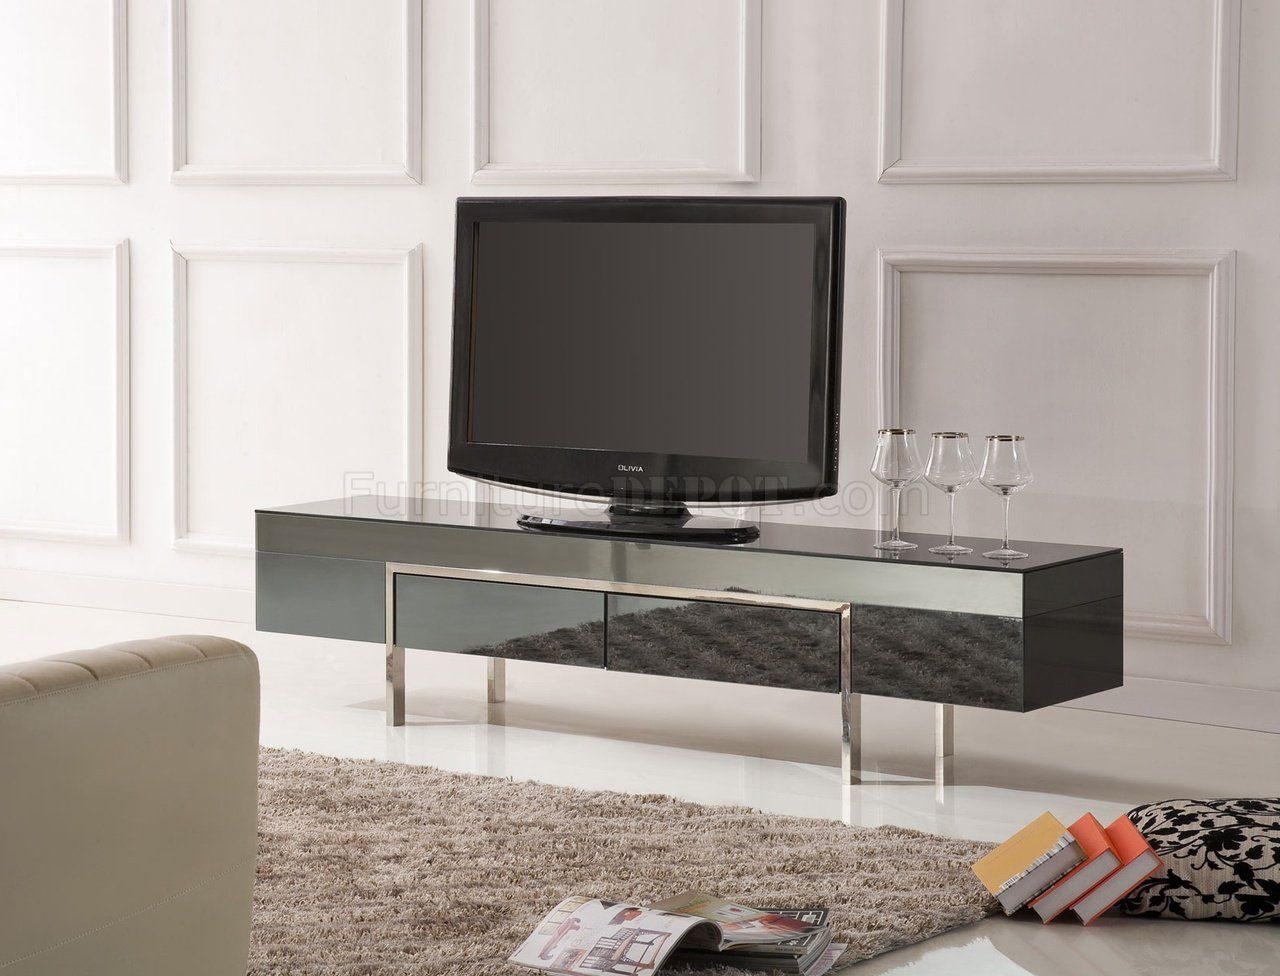 Black High Gloss Laquer Finish Modern Tv Stand W/metal Legs Throughout Modern Black Tv Stands On Wheels With Metal Cart (View 11 of 15)